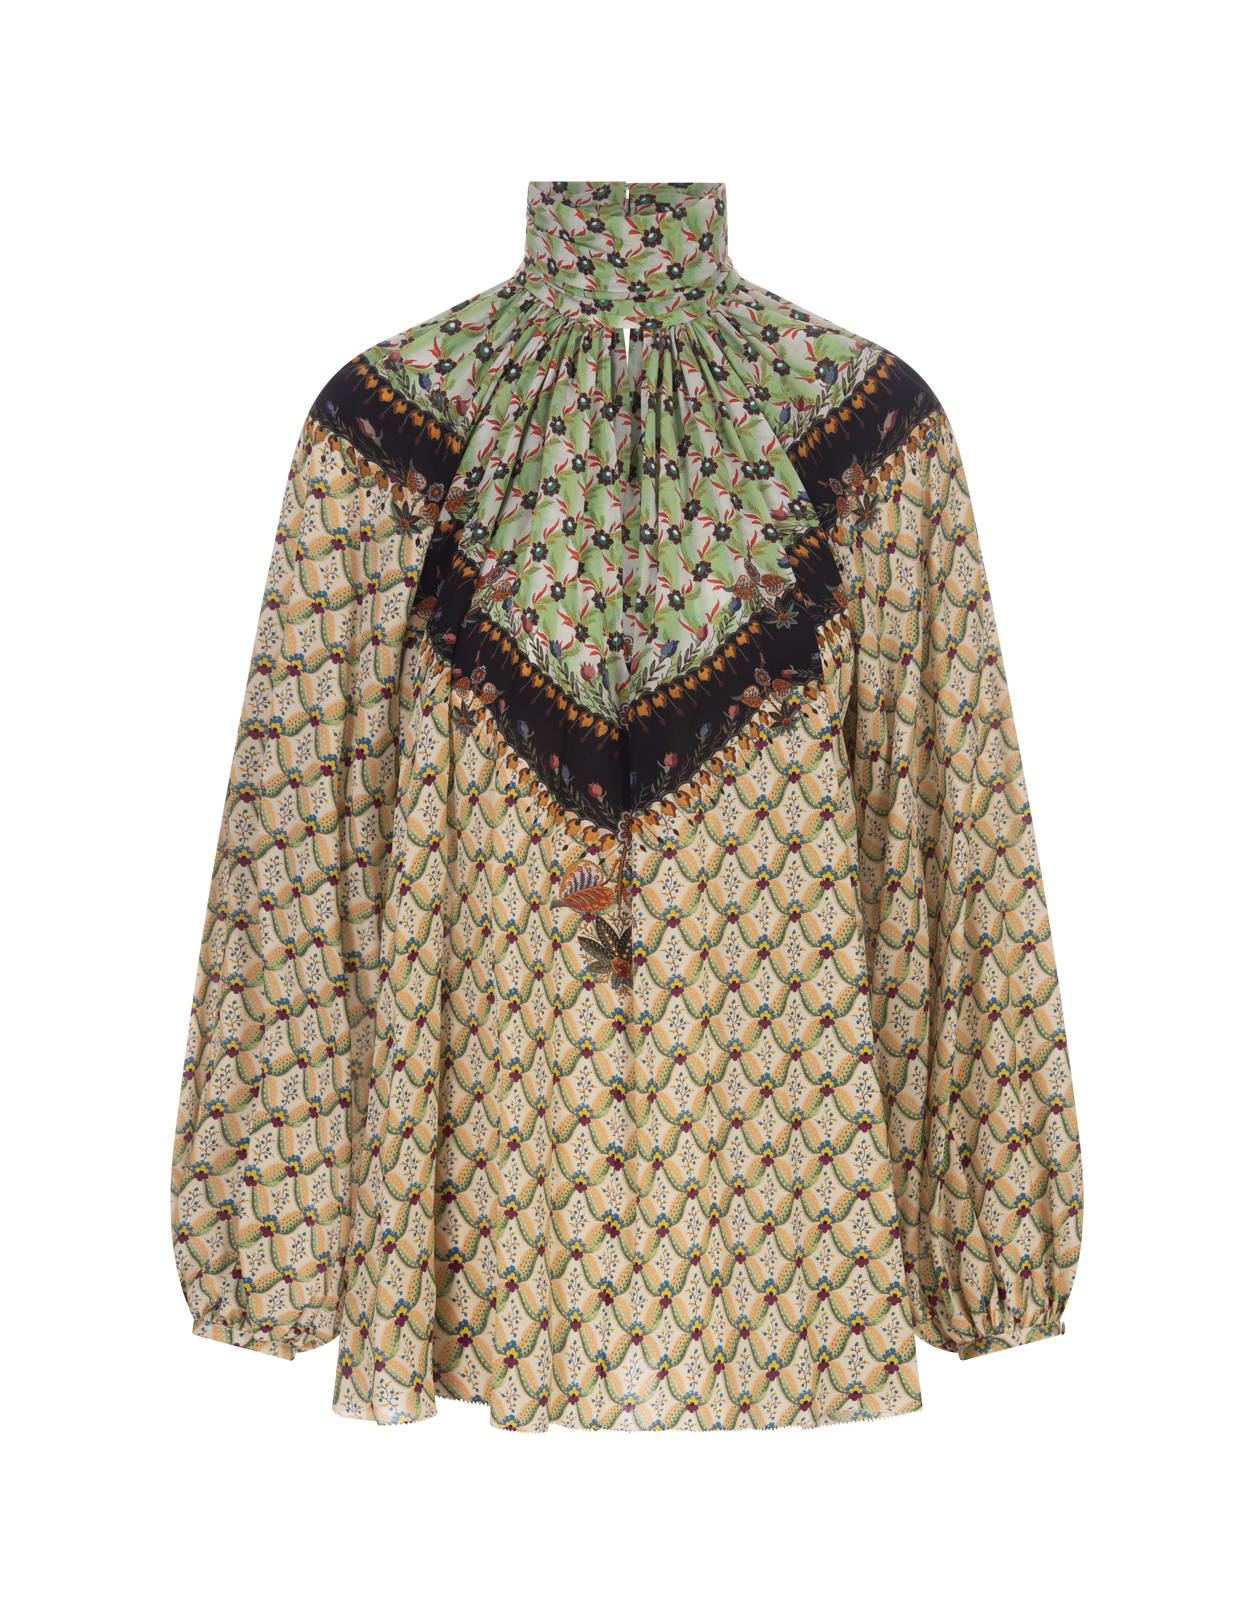 ETRO PRINTED CREPE DE CHINE BLOUSE IN GREEN